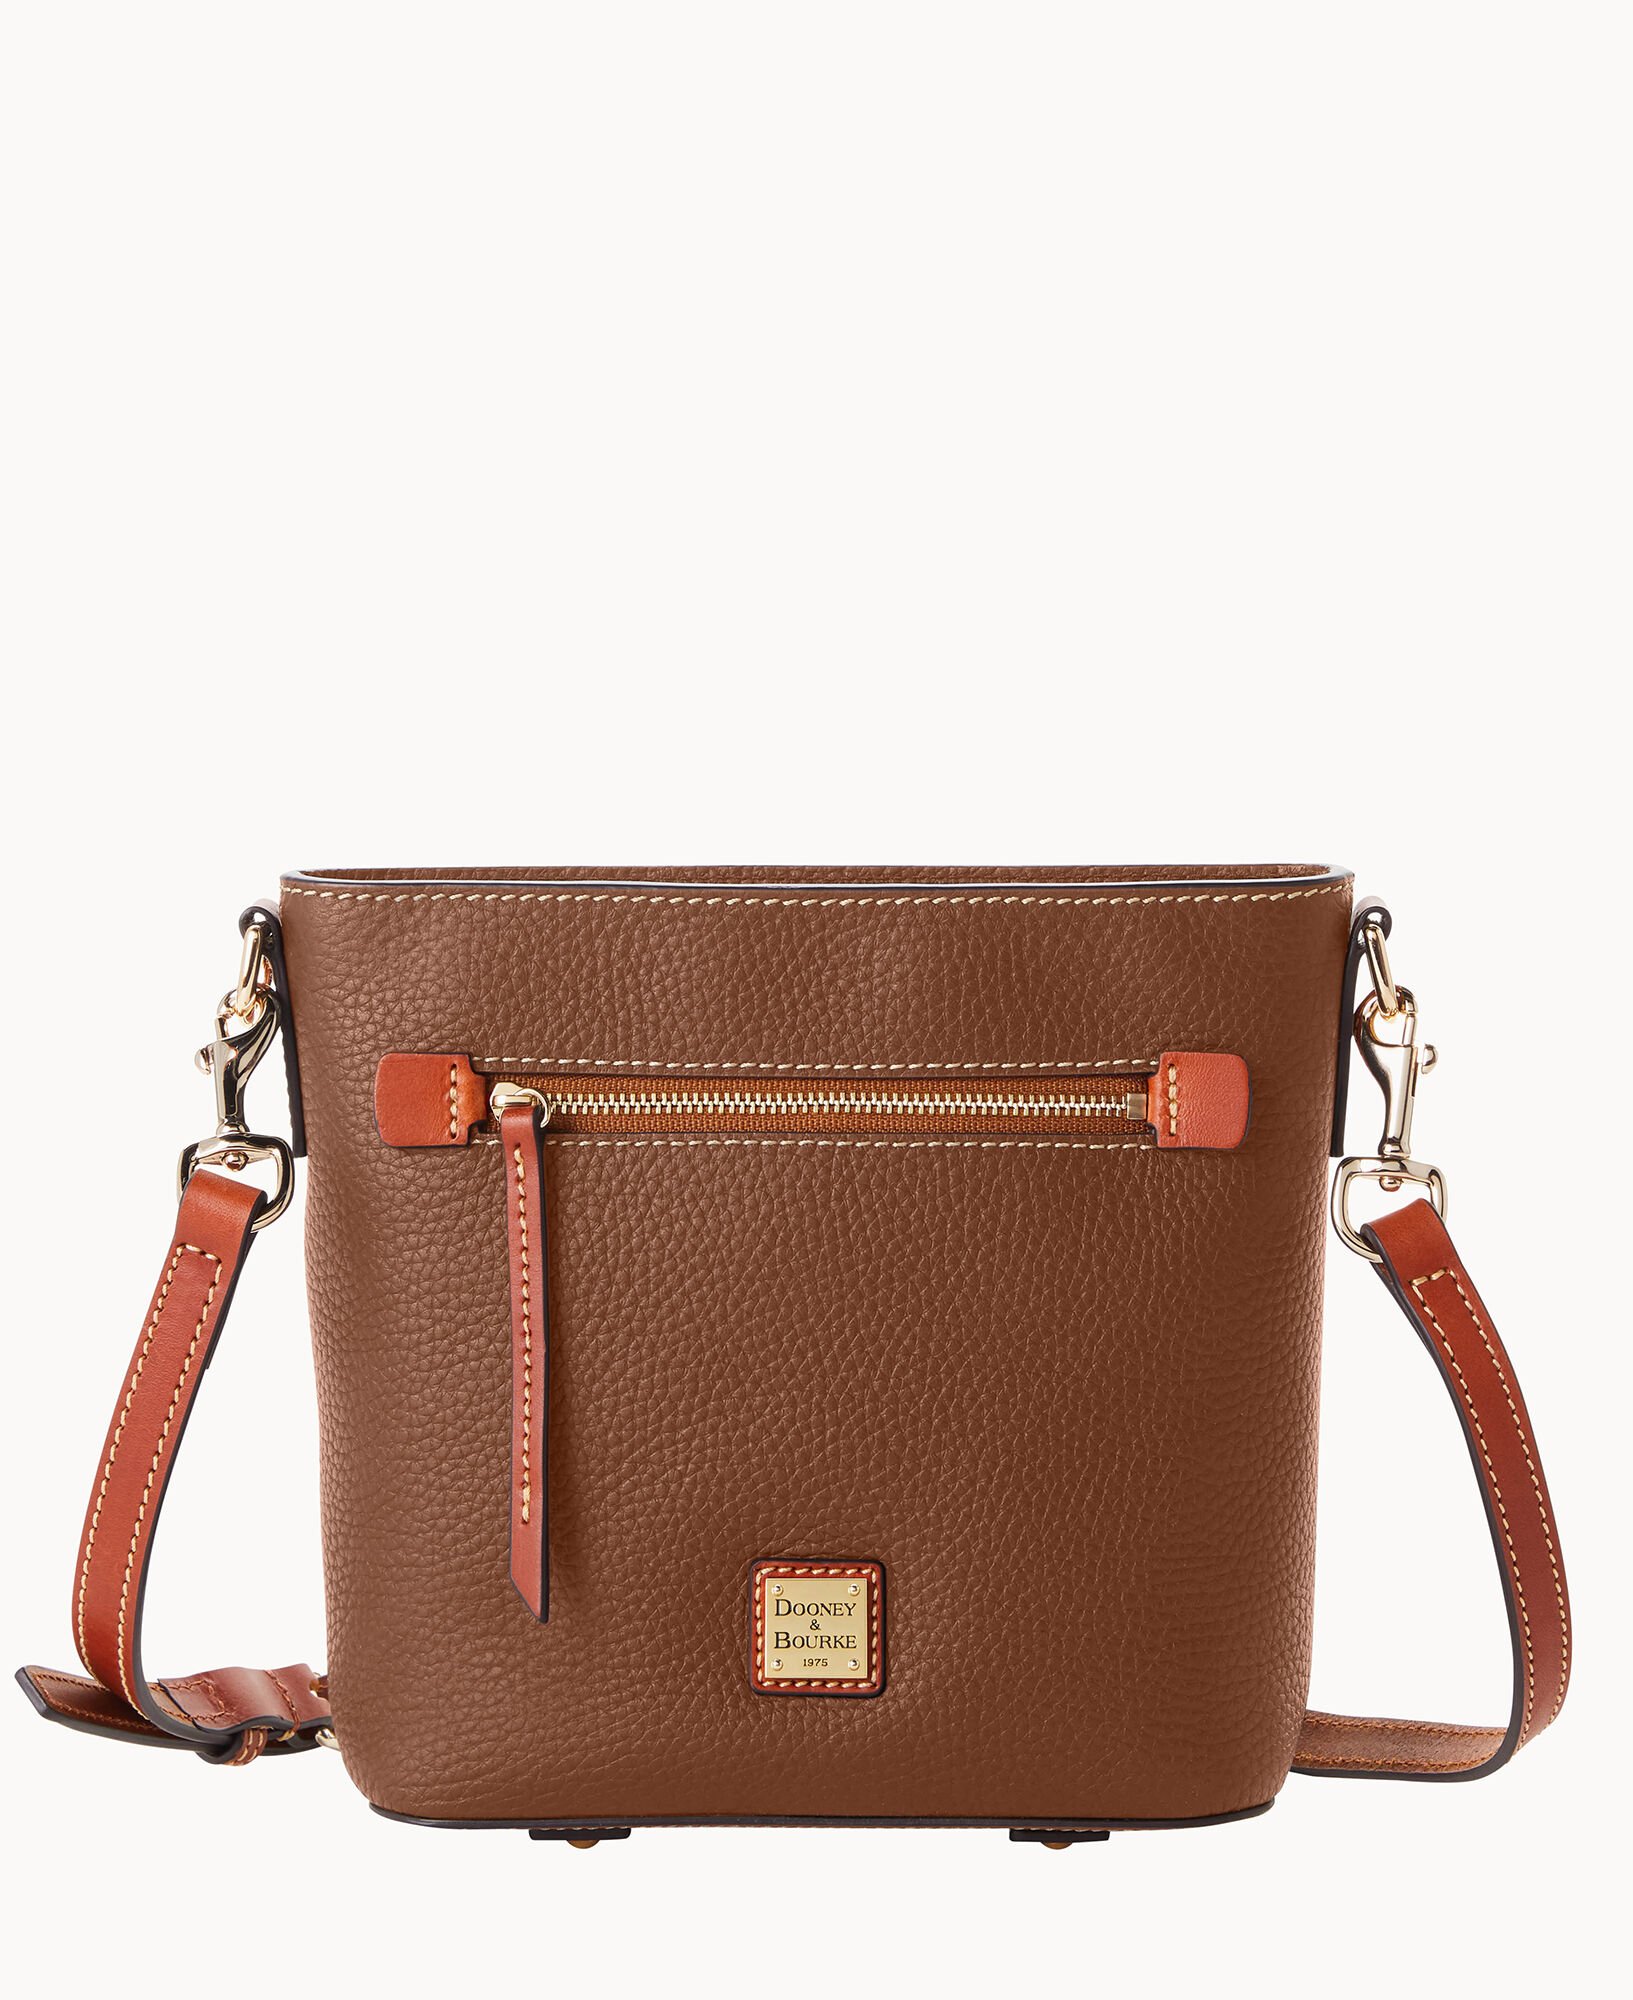 Dooney Bourke Crossbody - clothing & accessories - by owner